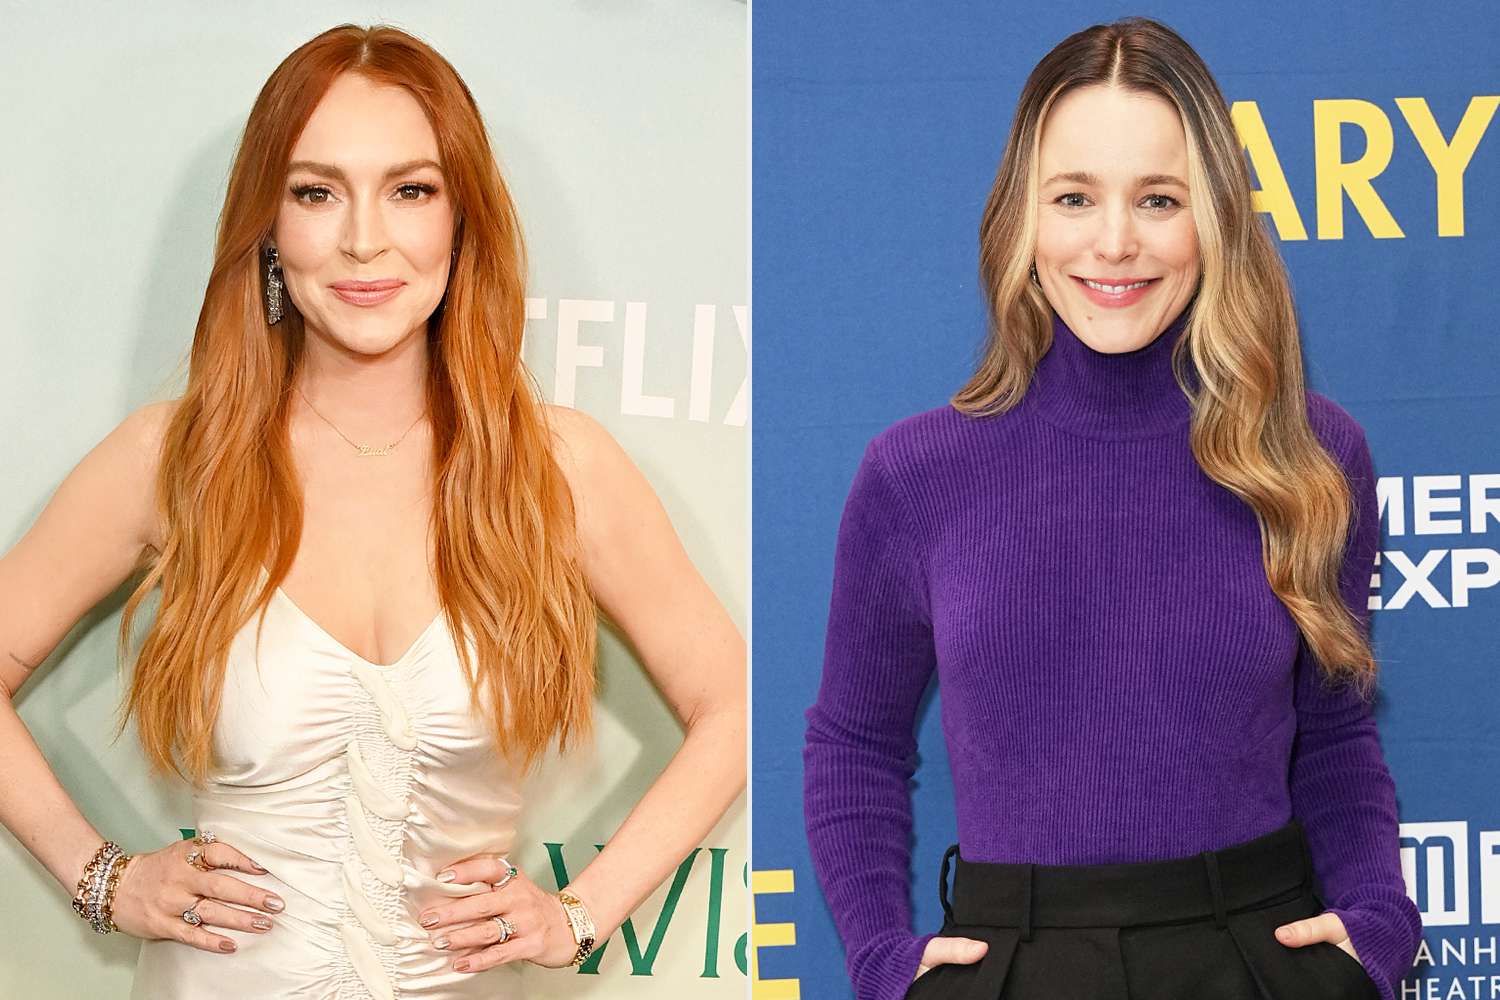 Lindsay Lohan and Rachel McAdams 'Interested' in Making “Mean Girls” Sequel 20 Years Later (Exclusive Source)